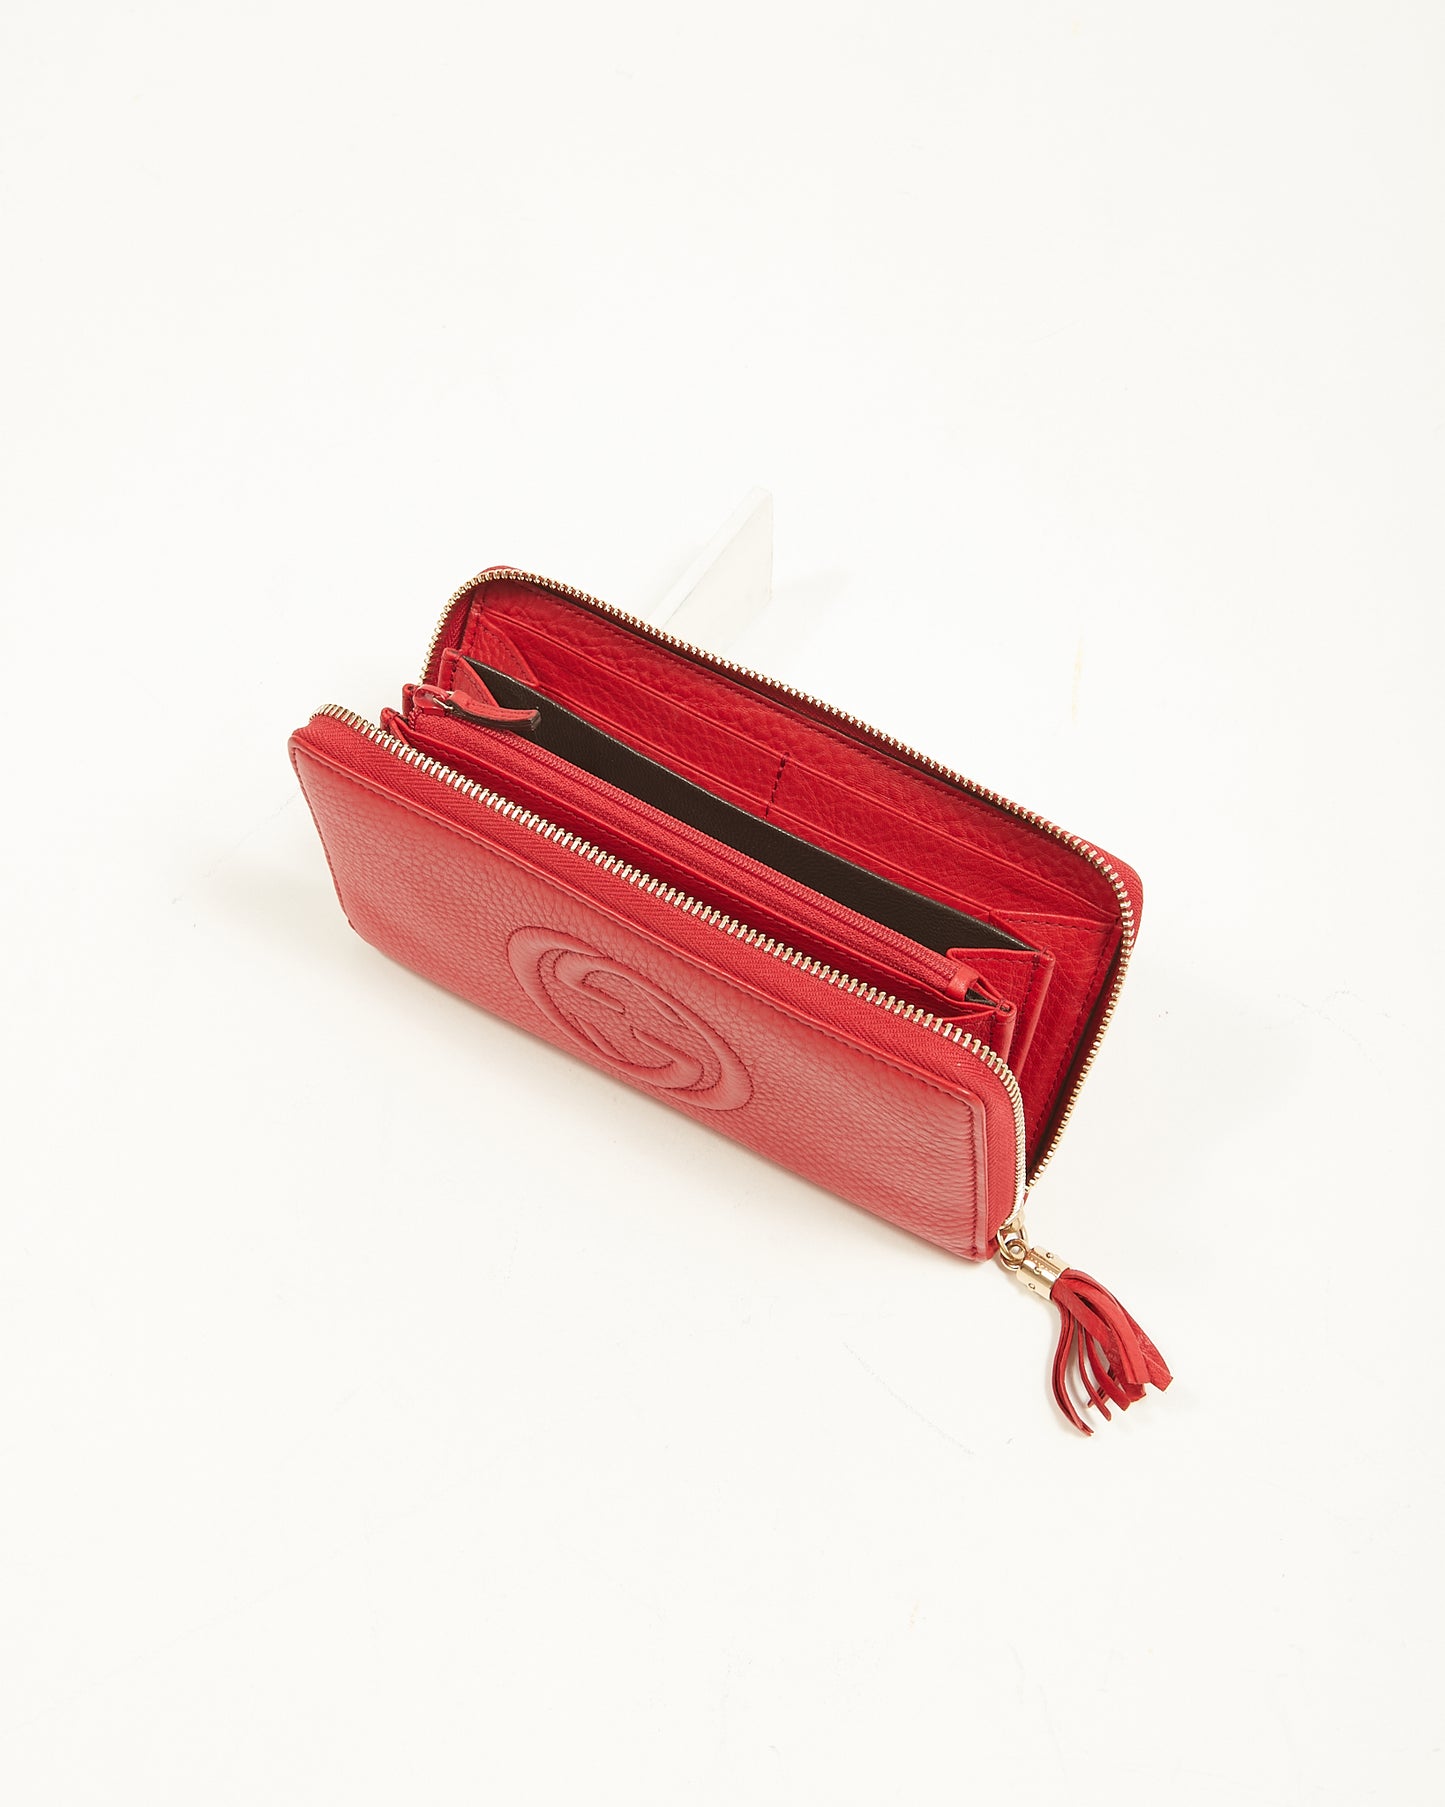 Gucci Red Pebbled Leather Soho Continental Zippy Wallet